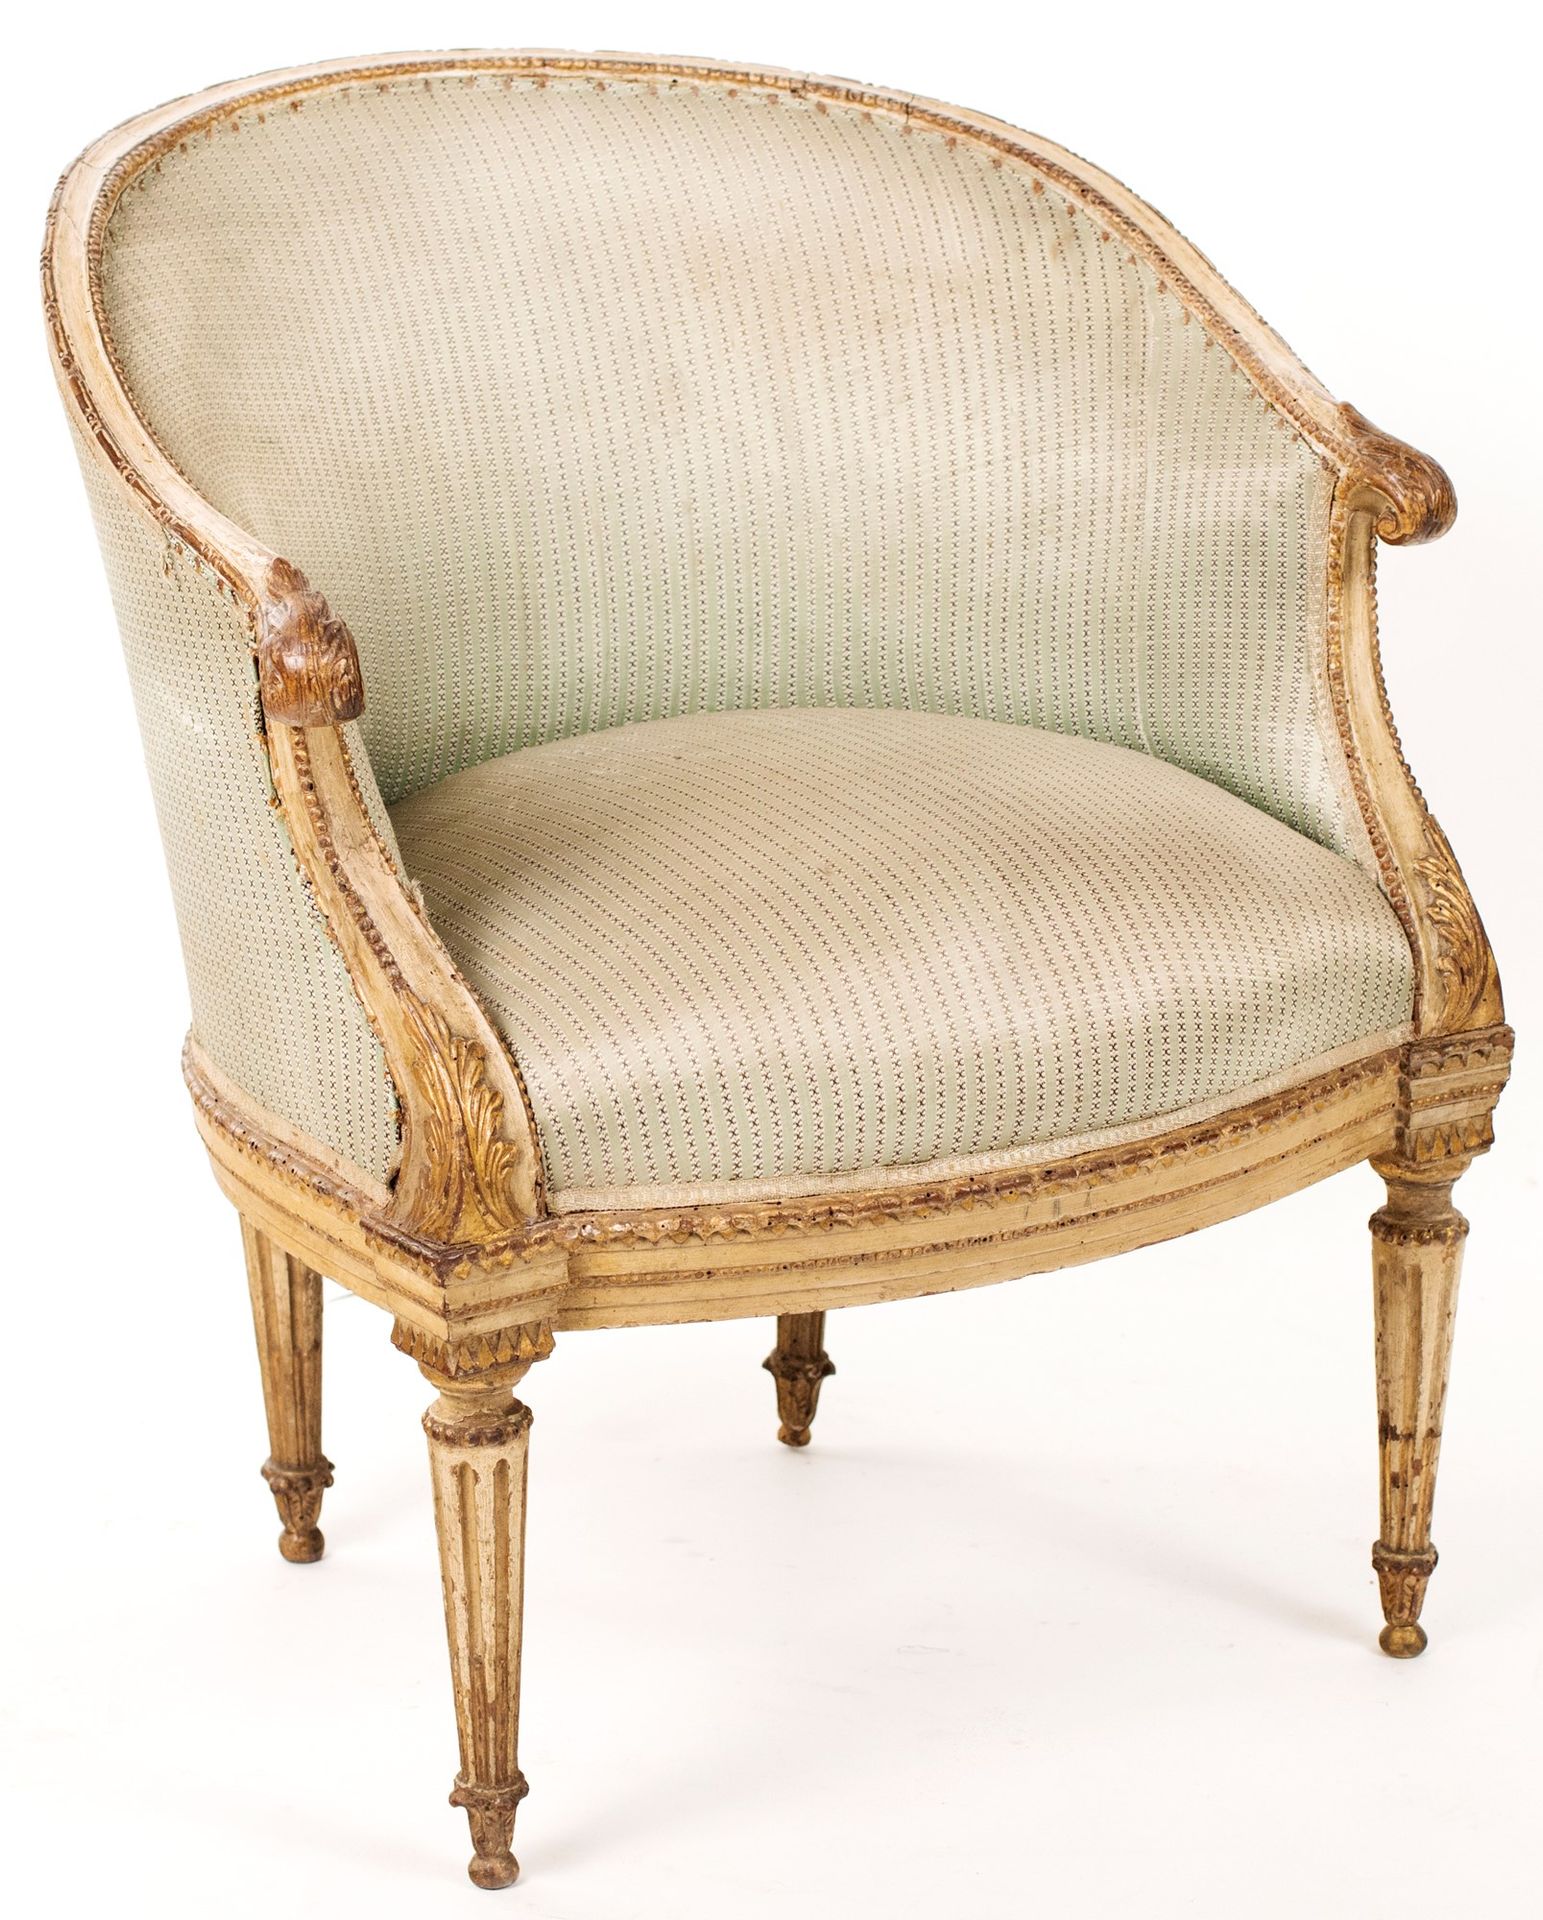 Cockpit armchair in lacquered and gilded wood, 19th century with profiles crosse&hellip;